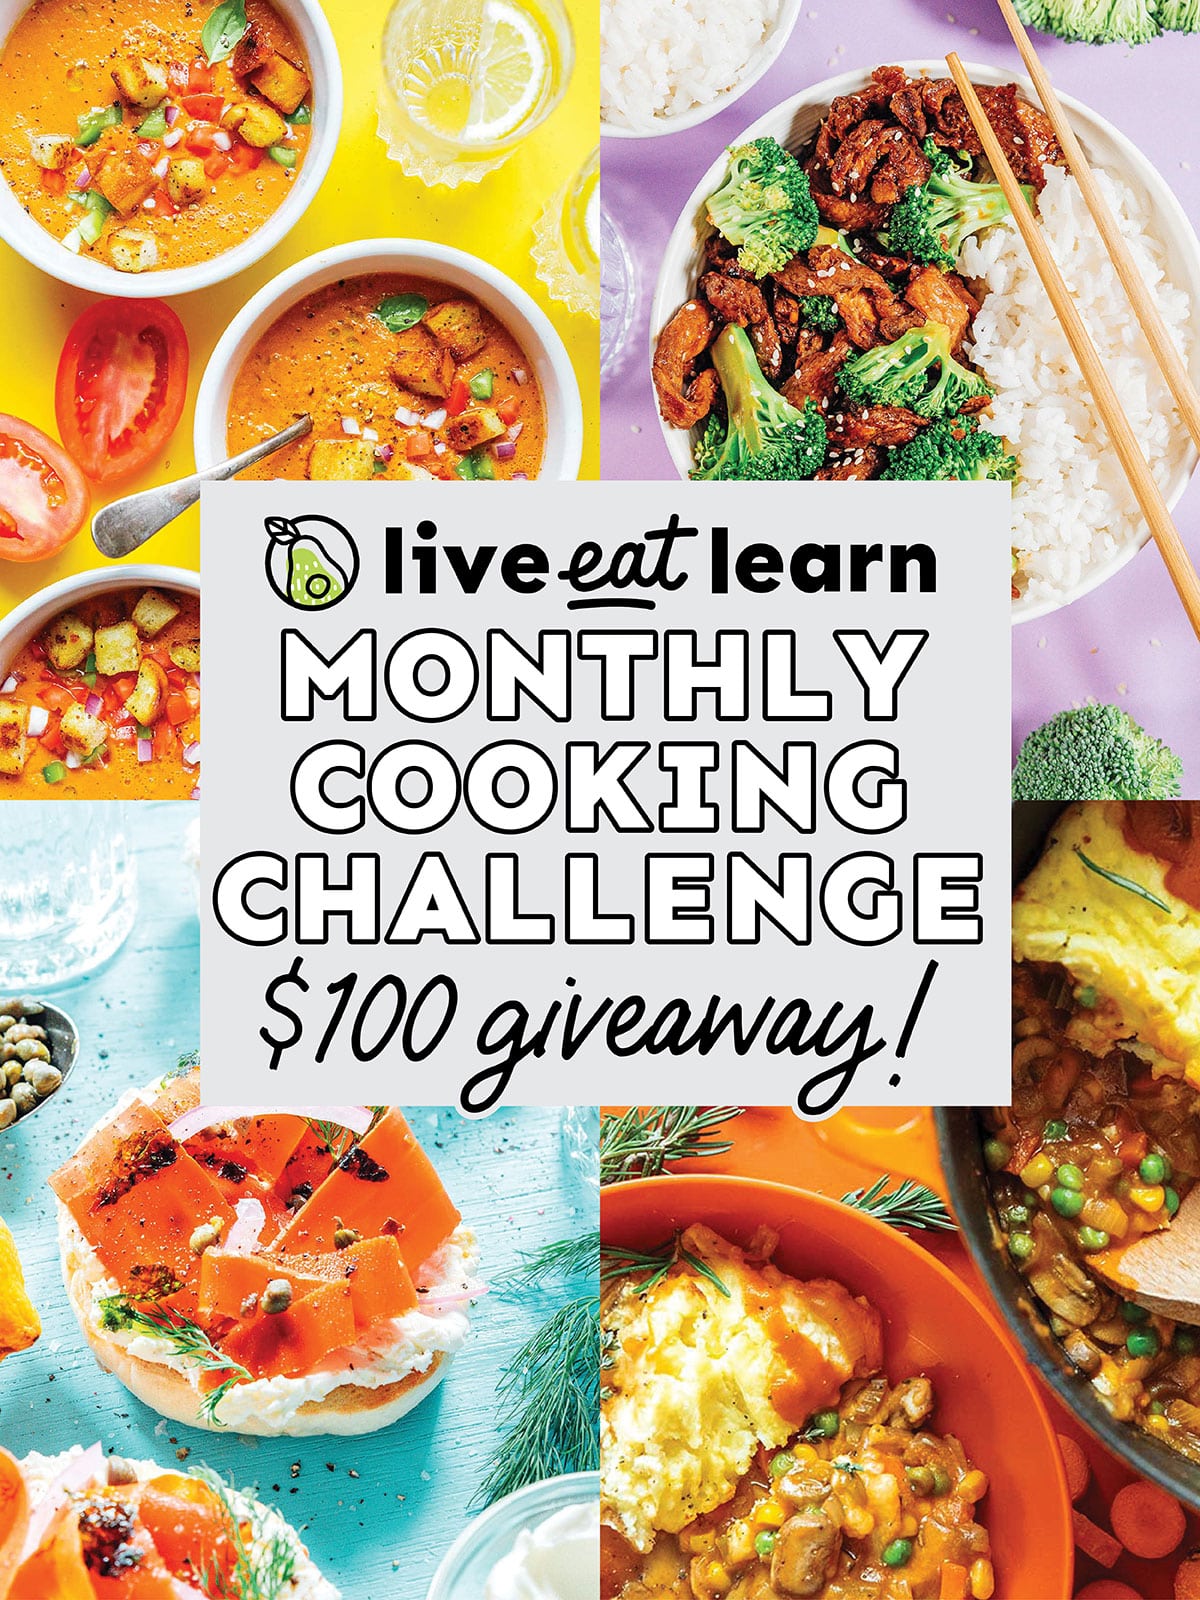 Collage that says "The Live Eat Learn Monthly Cooking Challenge"